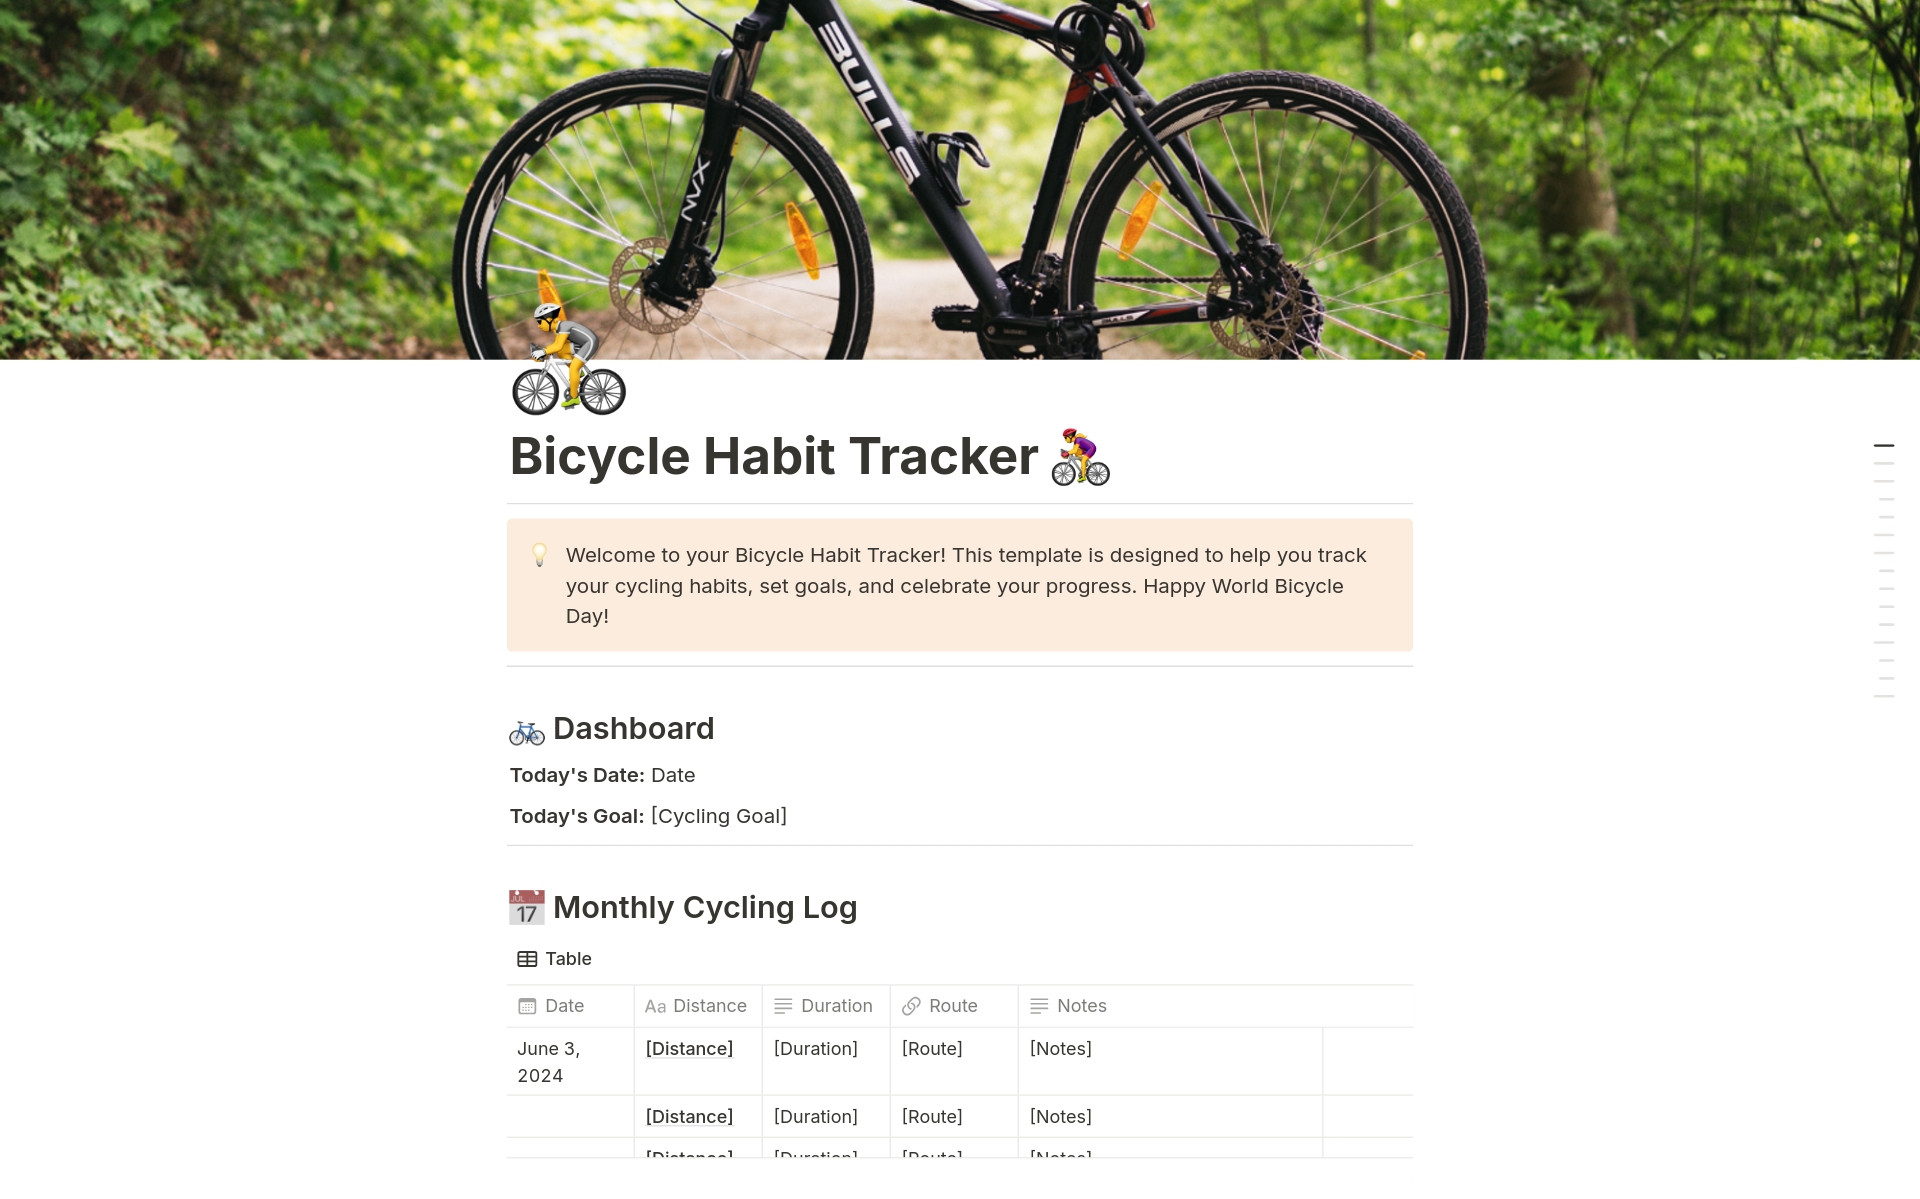 Celebrate World Bicycle Day with this comprehensive and customizable Bicycle Habit Tracker Notion Template! Whether you're a seasoned cyclist or just getting started, this template is designed to help you track your cycling habits, set goals, and celebrate your progress.